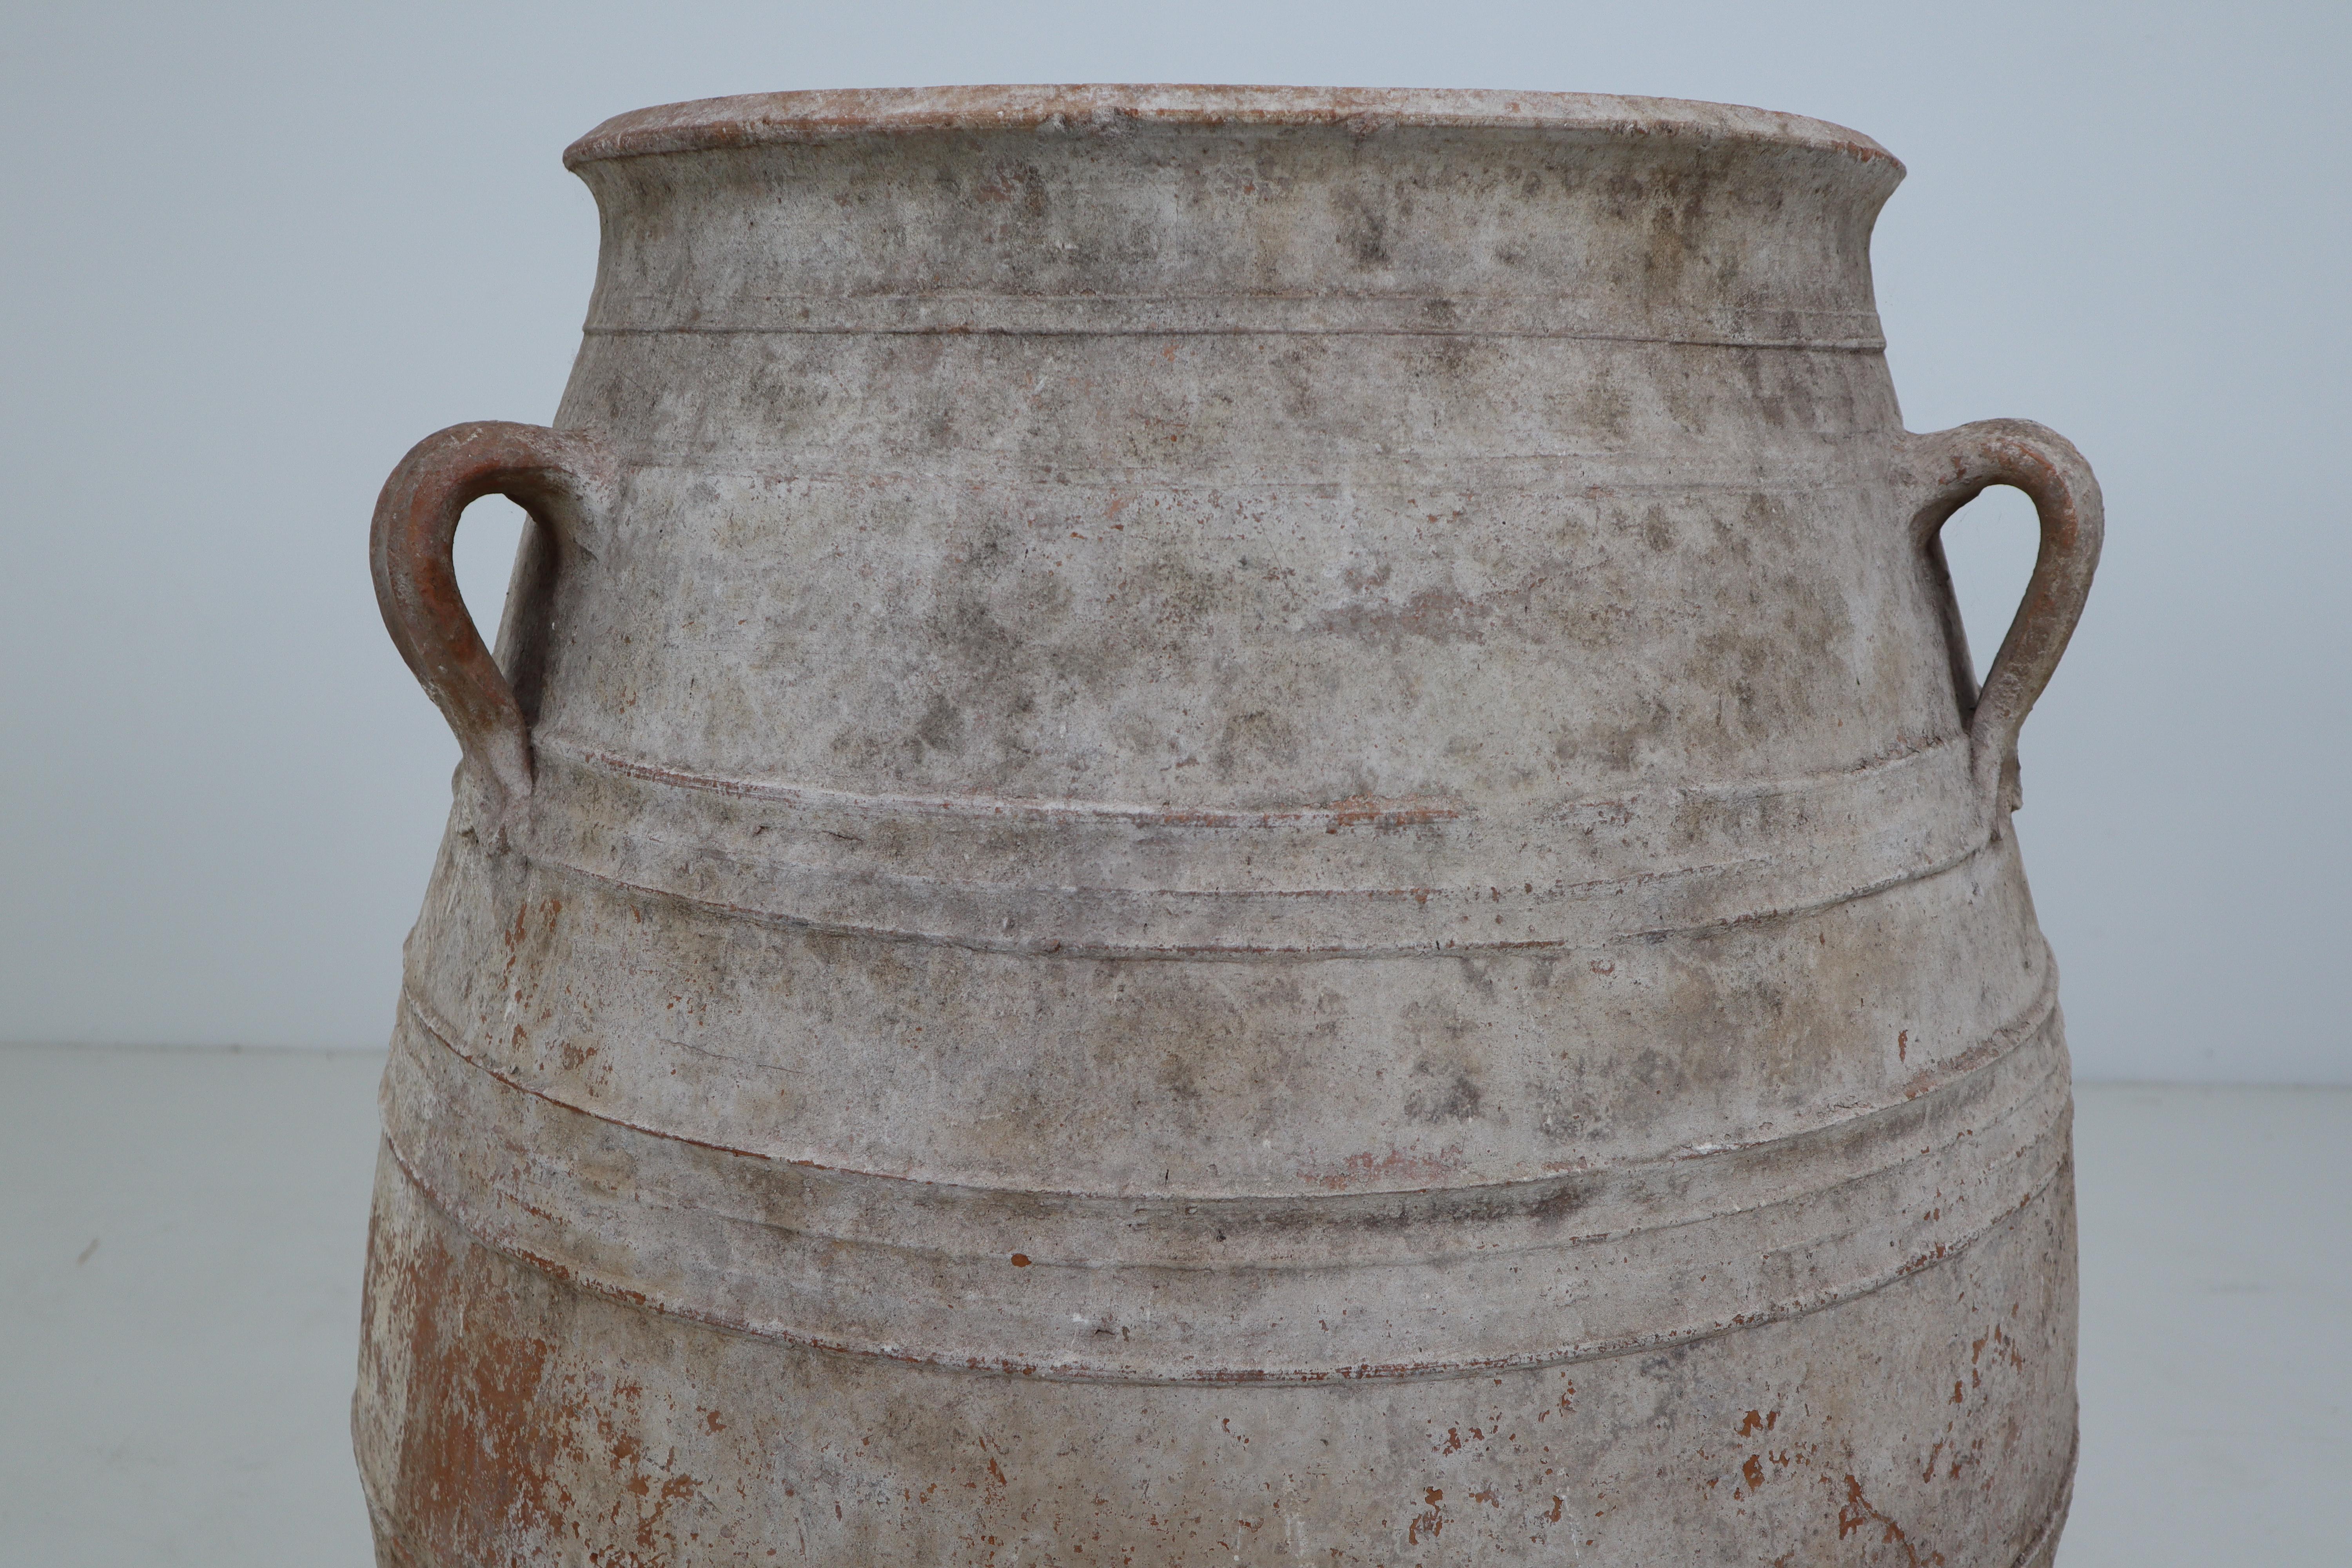 Greek Extreme Large Three-Handled Painted Terracotta Urn From The Early-20th Century.